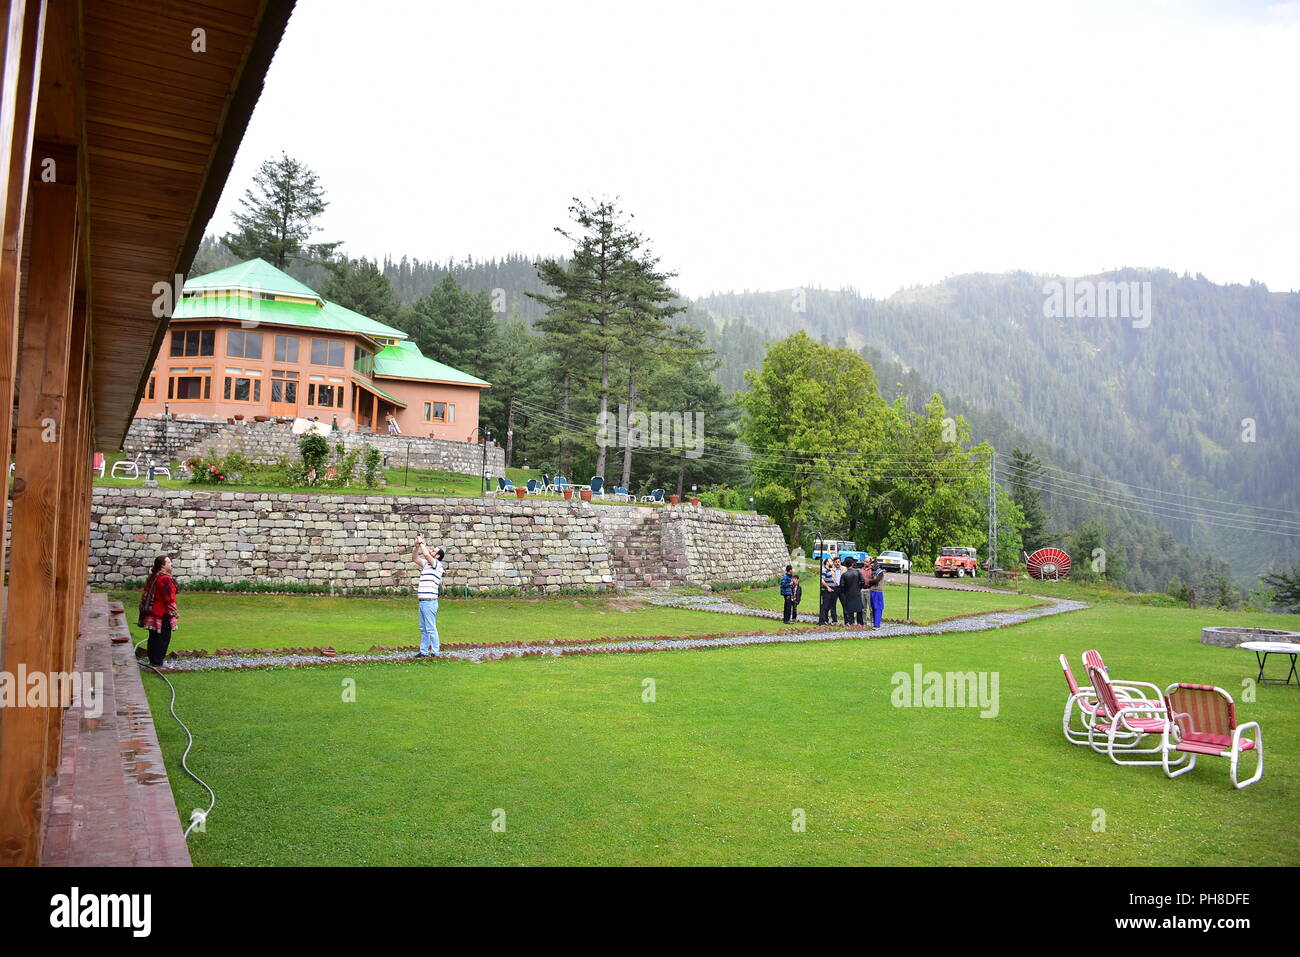 Serene and beautiful Shogran. Situated on a hill top with very pleasant weather and lovely environment. Quite place to send time with dear ones. Stock Photo